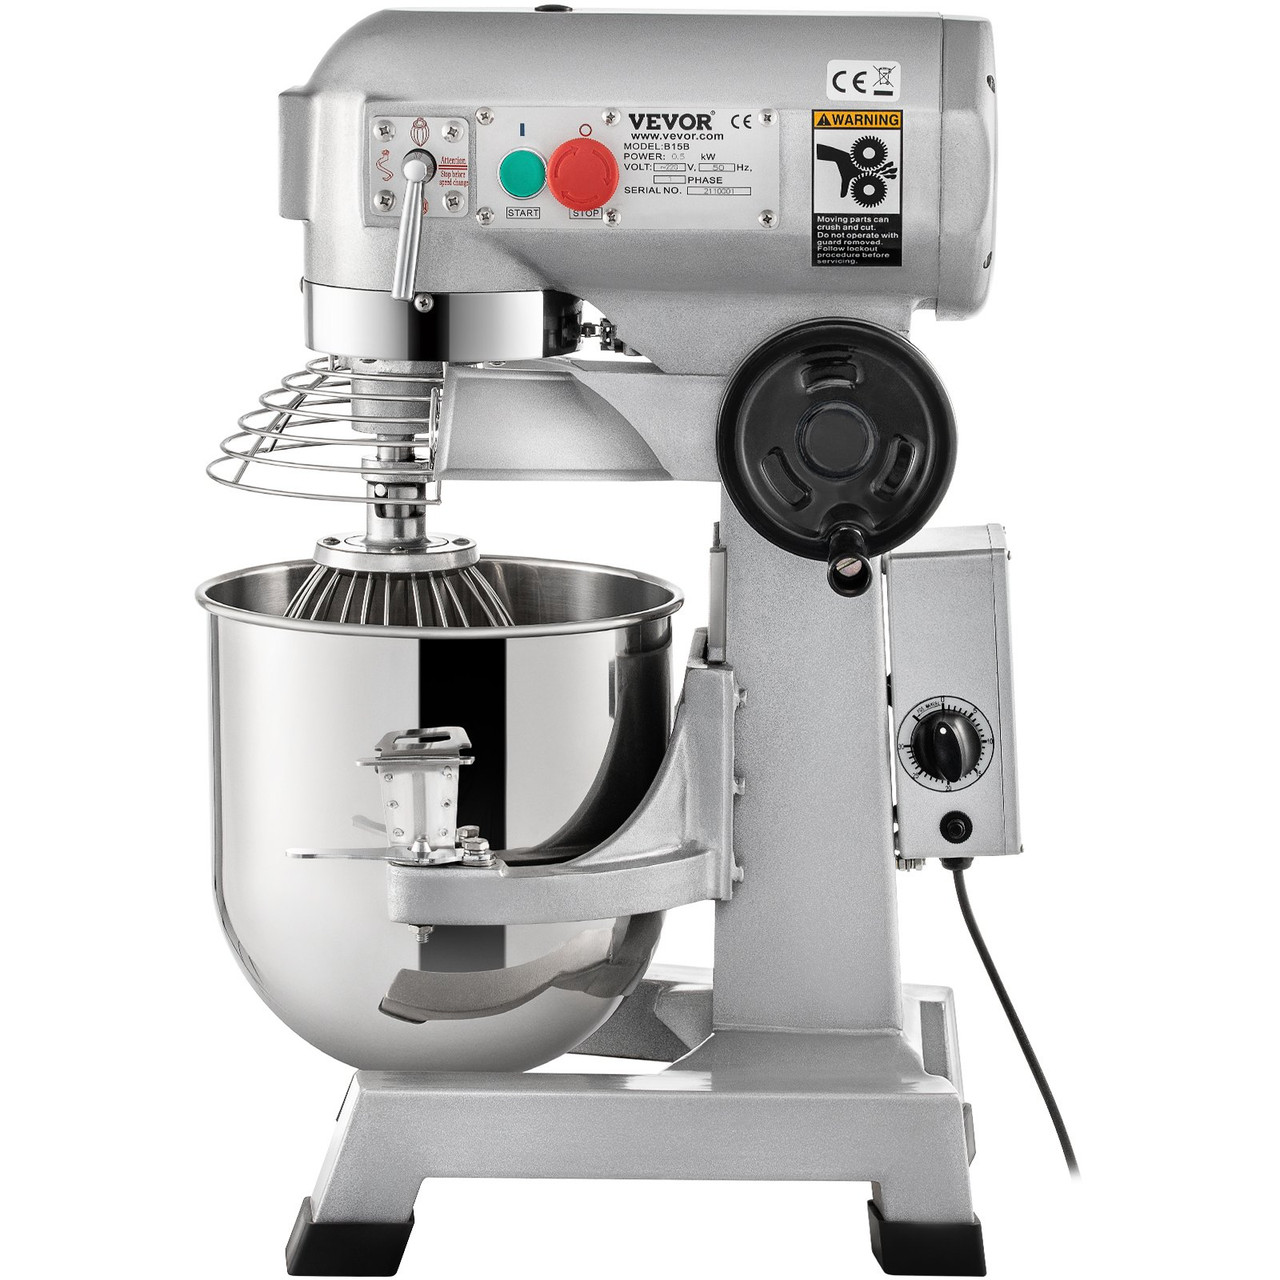 VEVOR Commercial Food Mixer, 20Qt Commercial Mixer with Timing Function, 750W Stainless Steel Bowl Heavy Duty Electric Food Mixer Commercial with 3 Speeds Adjustable 108/199/382 RPM, Dough Hook Whisk Beater Included, Perfect for Bakery Pizzeria